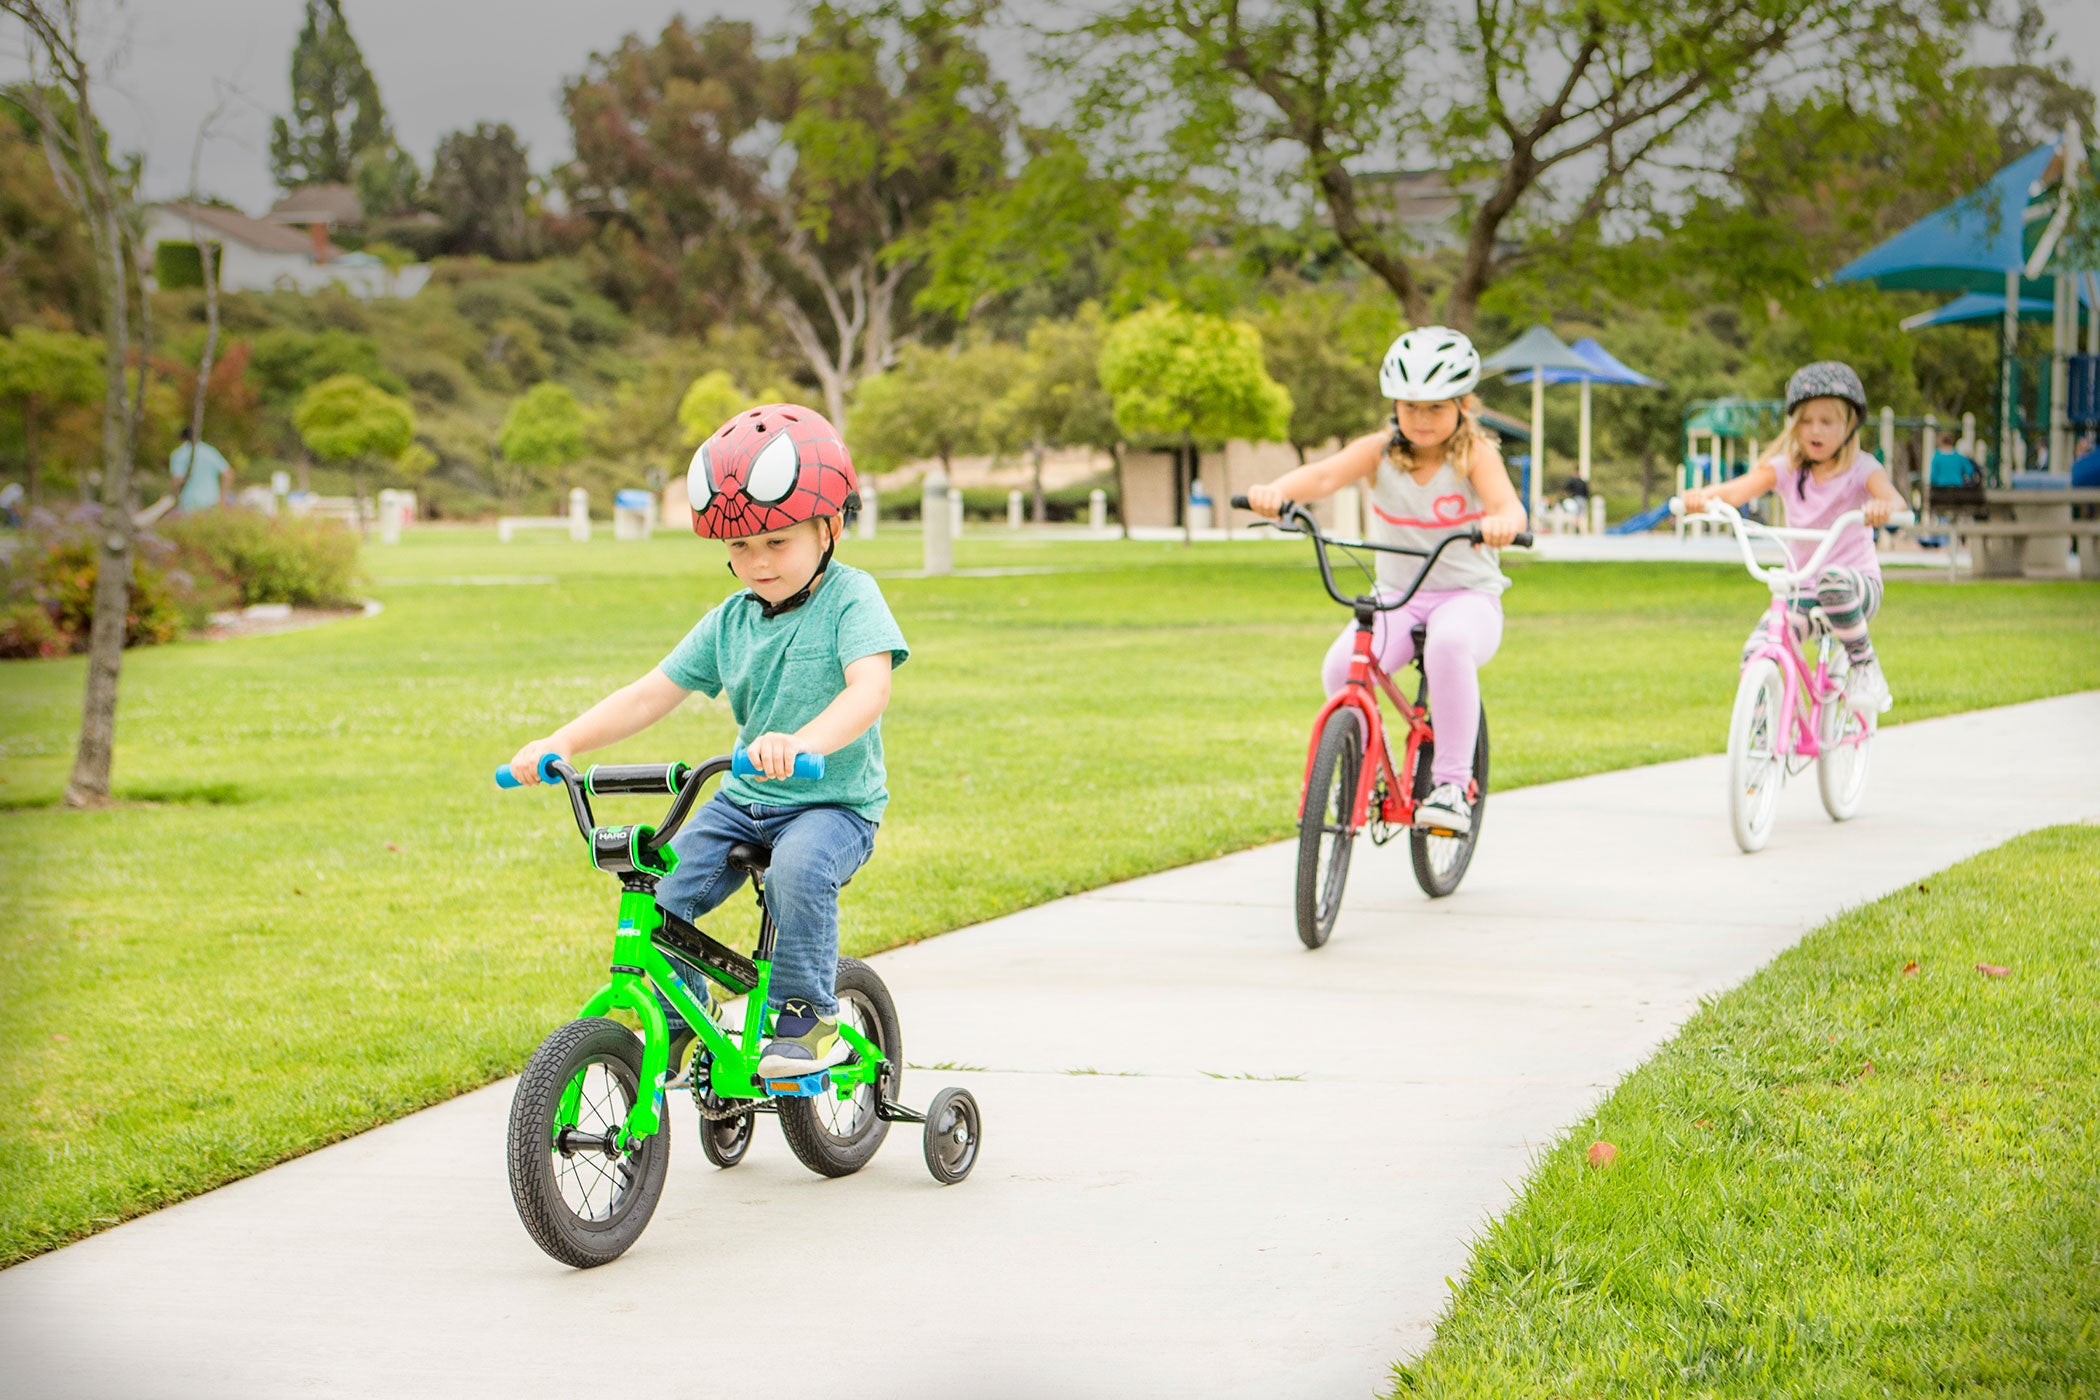 Kids riding bikes in a park